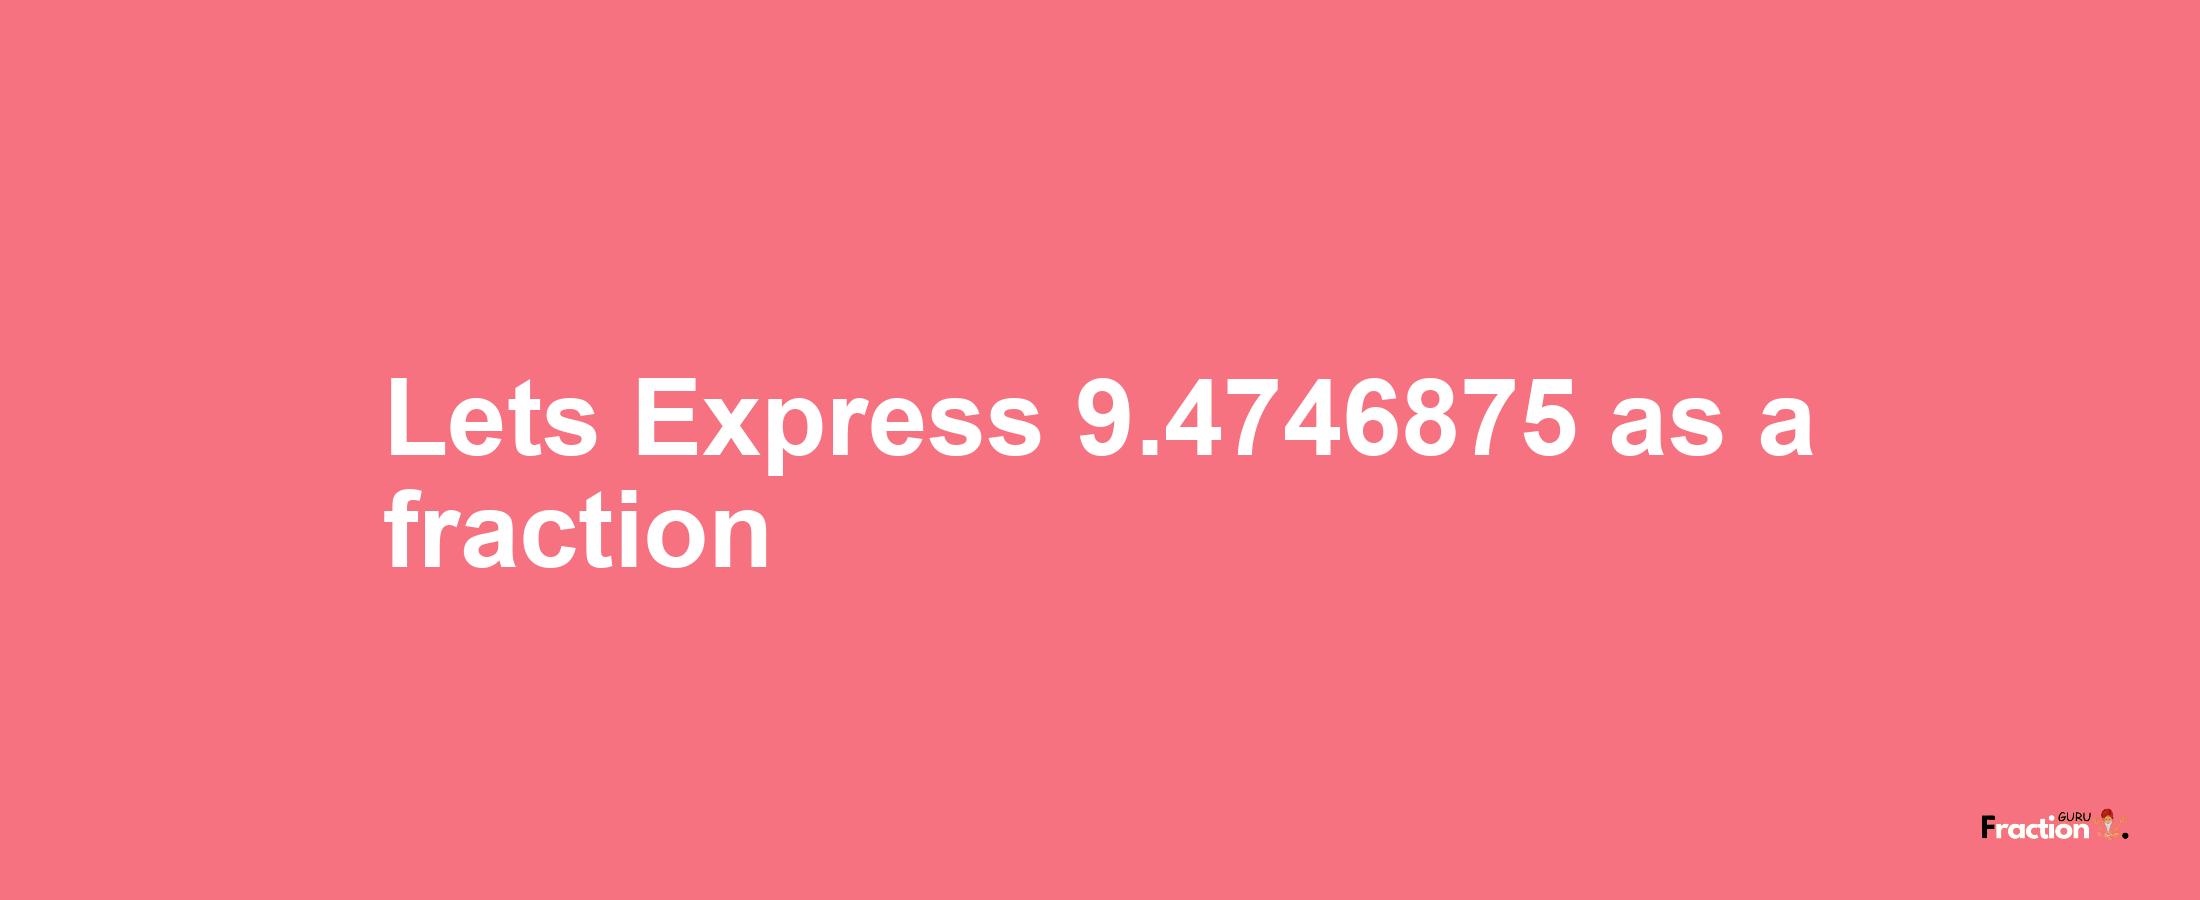 Lets Express 9.4746875 as afraction